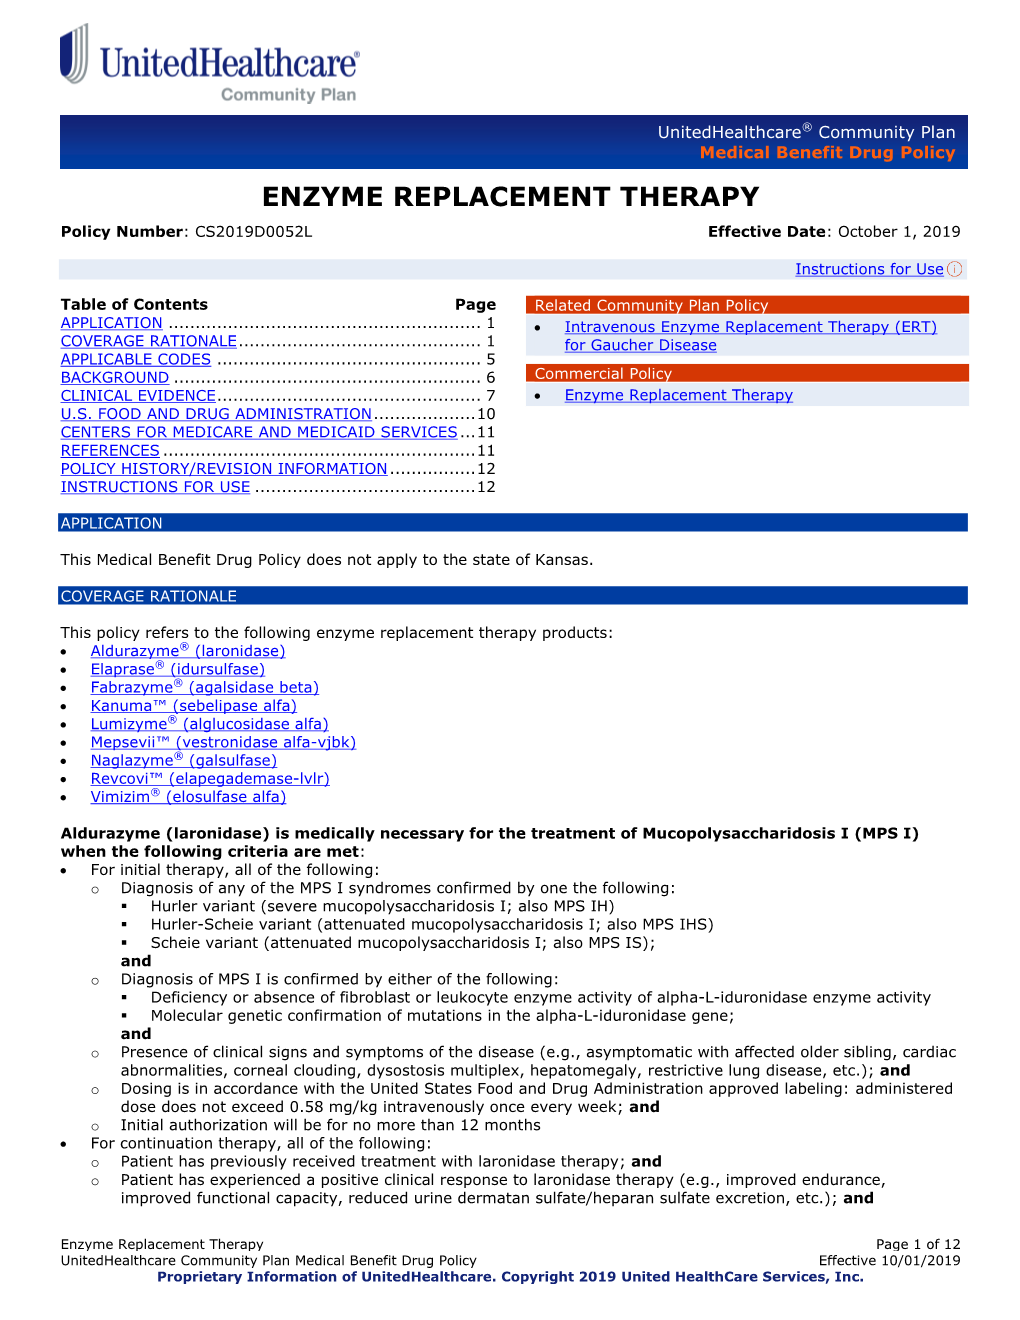 ENZYME REPLACEMENT THERAPY Policy Number: CS2019D0052L Effective Date: October 1, 2019